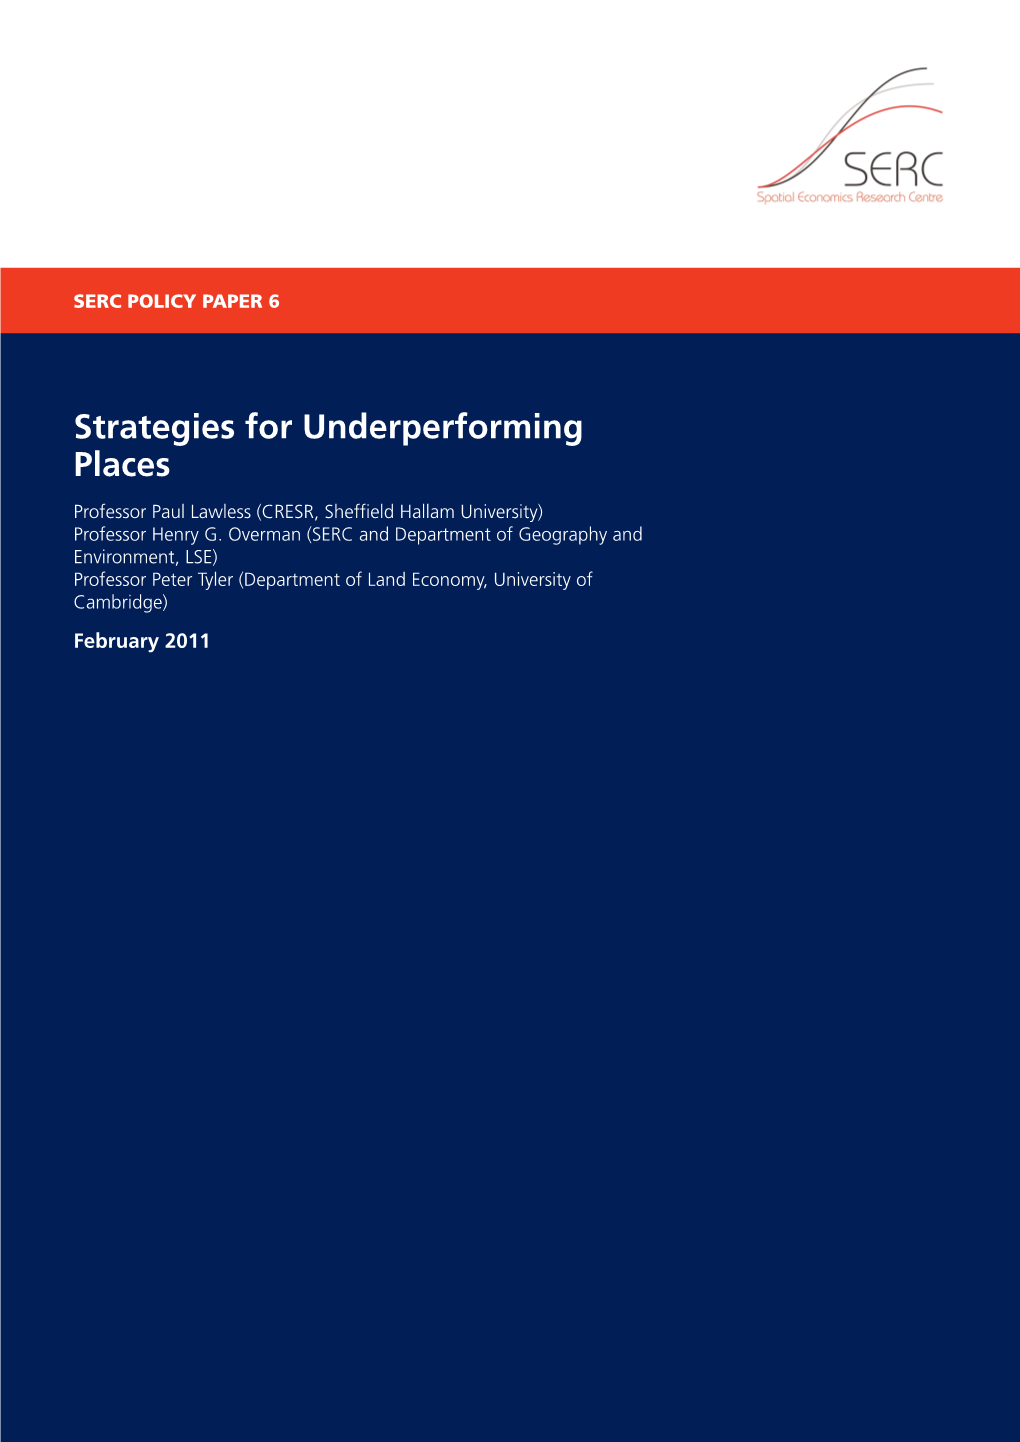 Strategies for Underperforming Places